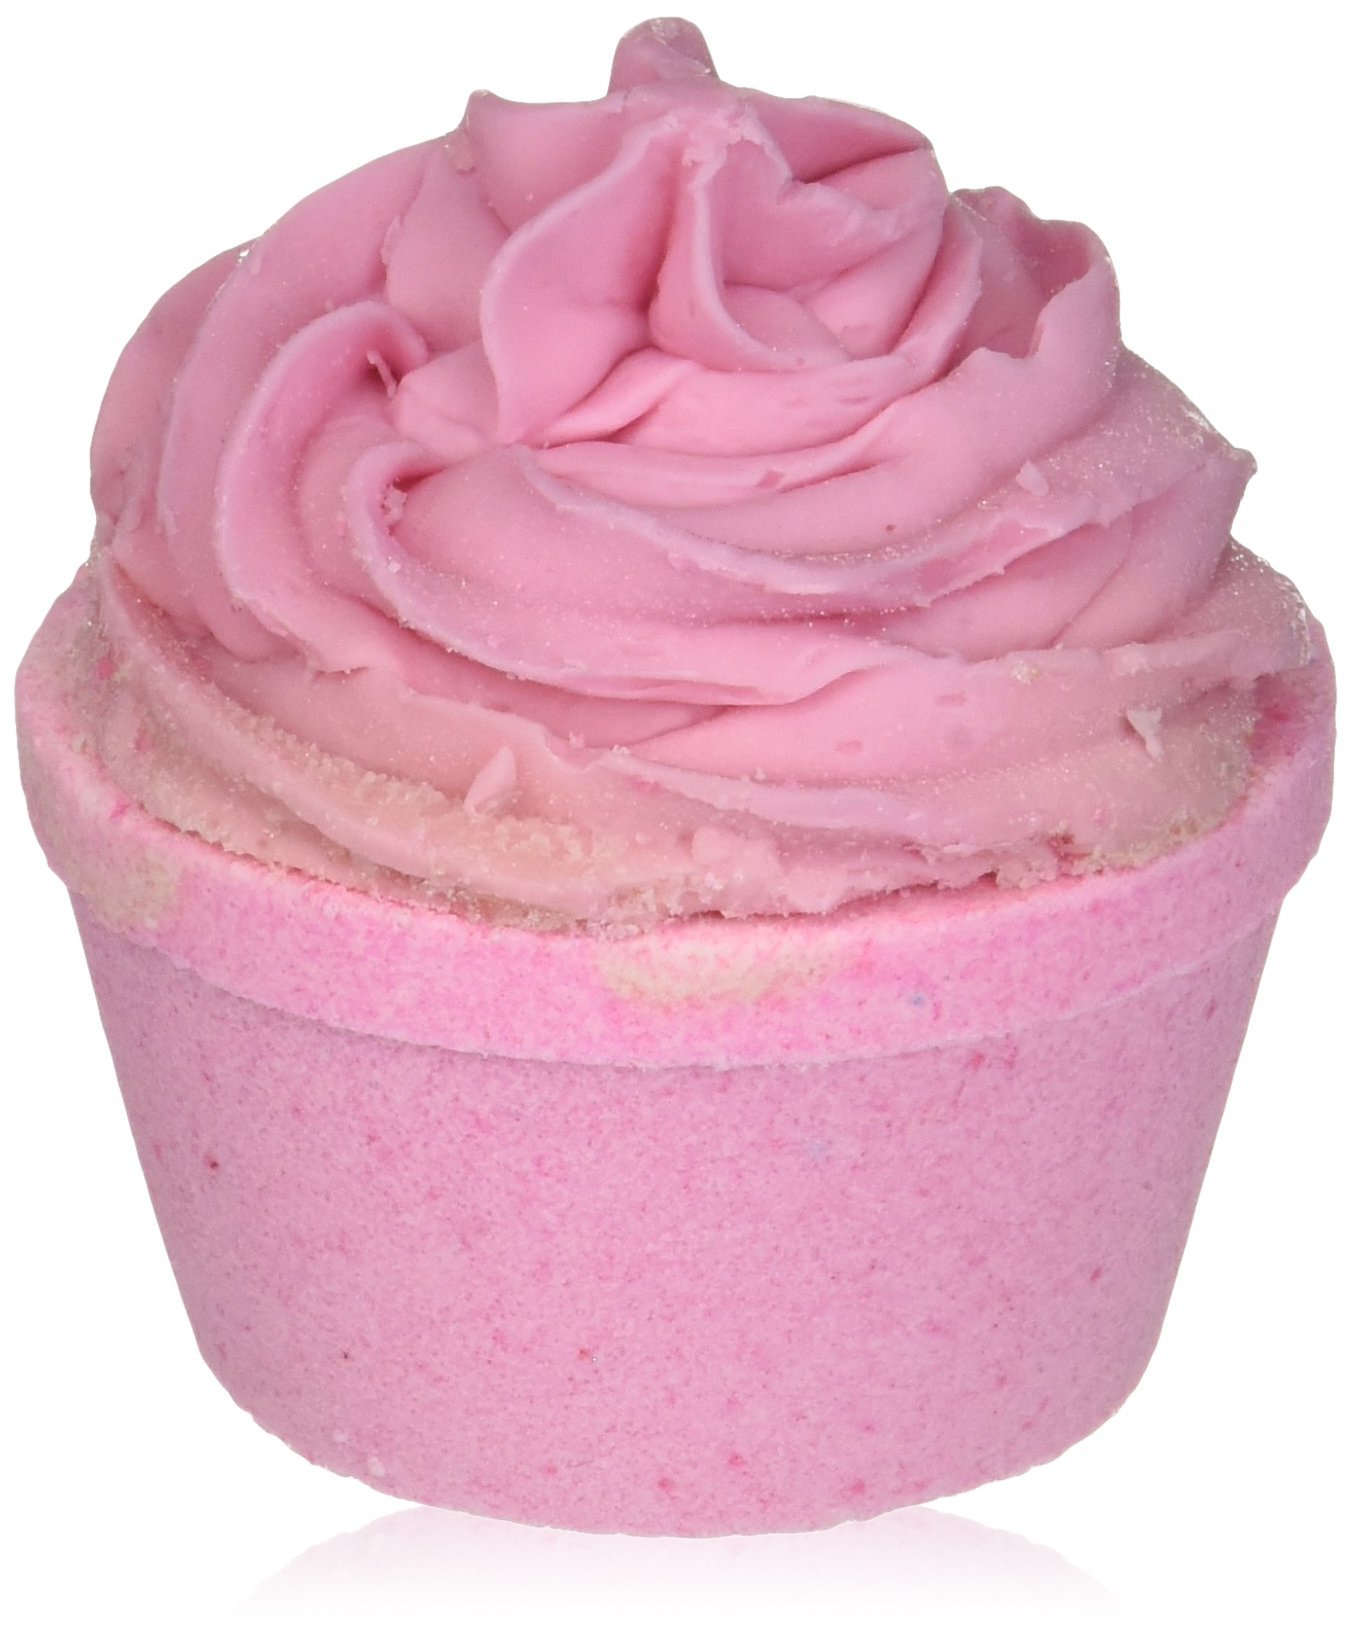 Yumscents Cupcake Fizzy Bath Bombs, Strawberry